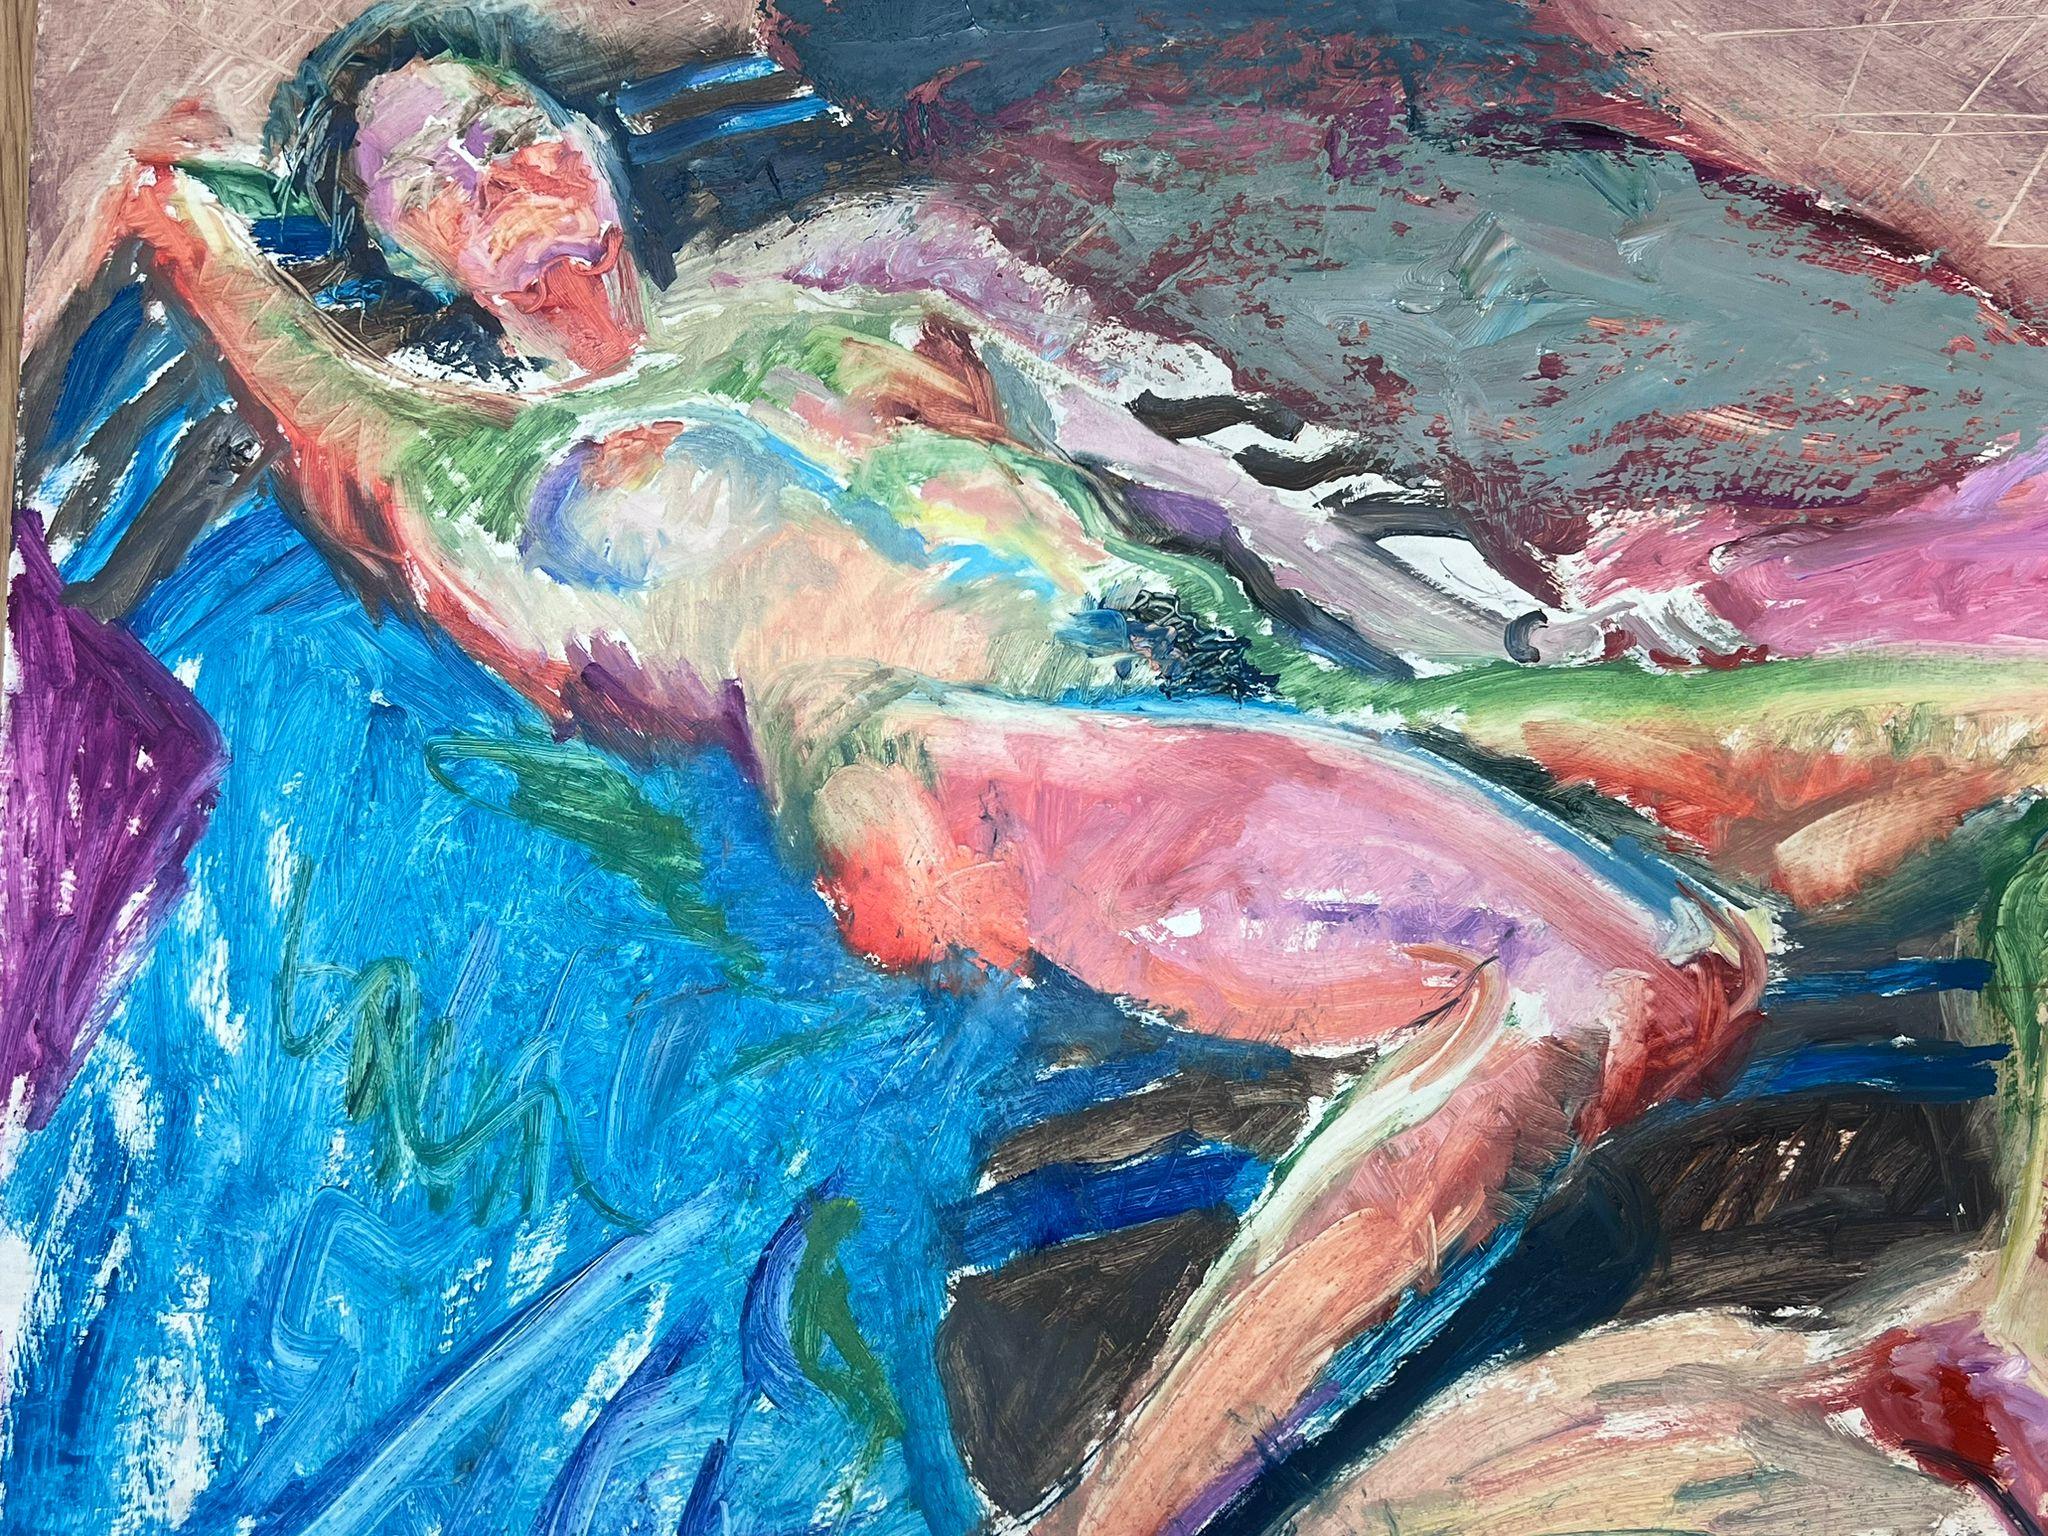 Nude Model
by Helen Greenfield (British 20th century) 
oil painting on board, unframed
board: 20.5 x 24 inches
condition: overall very good
provenance: all the paintings we have by this artist have come from their studio sale in England

Helen was a